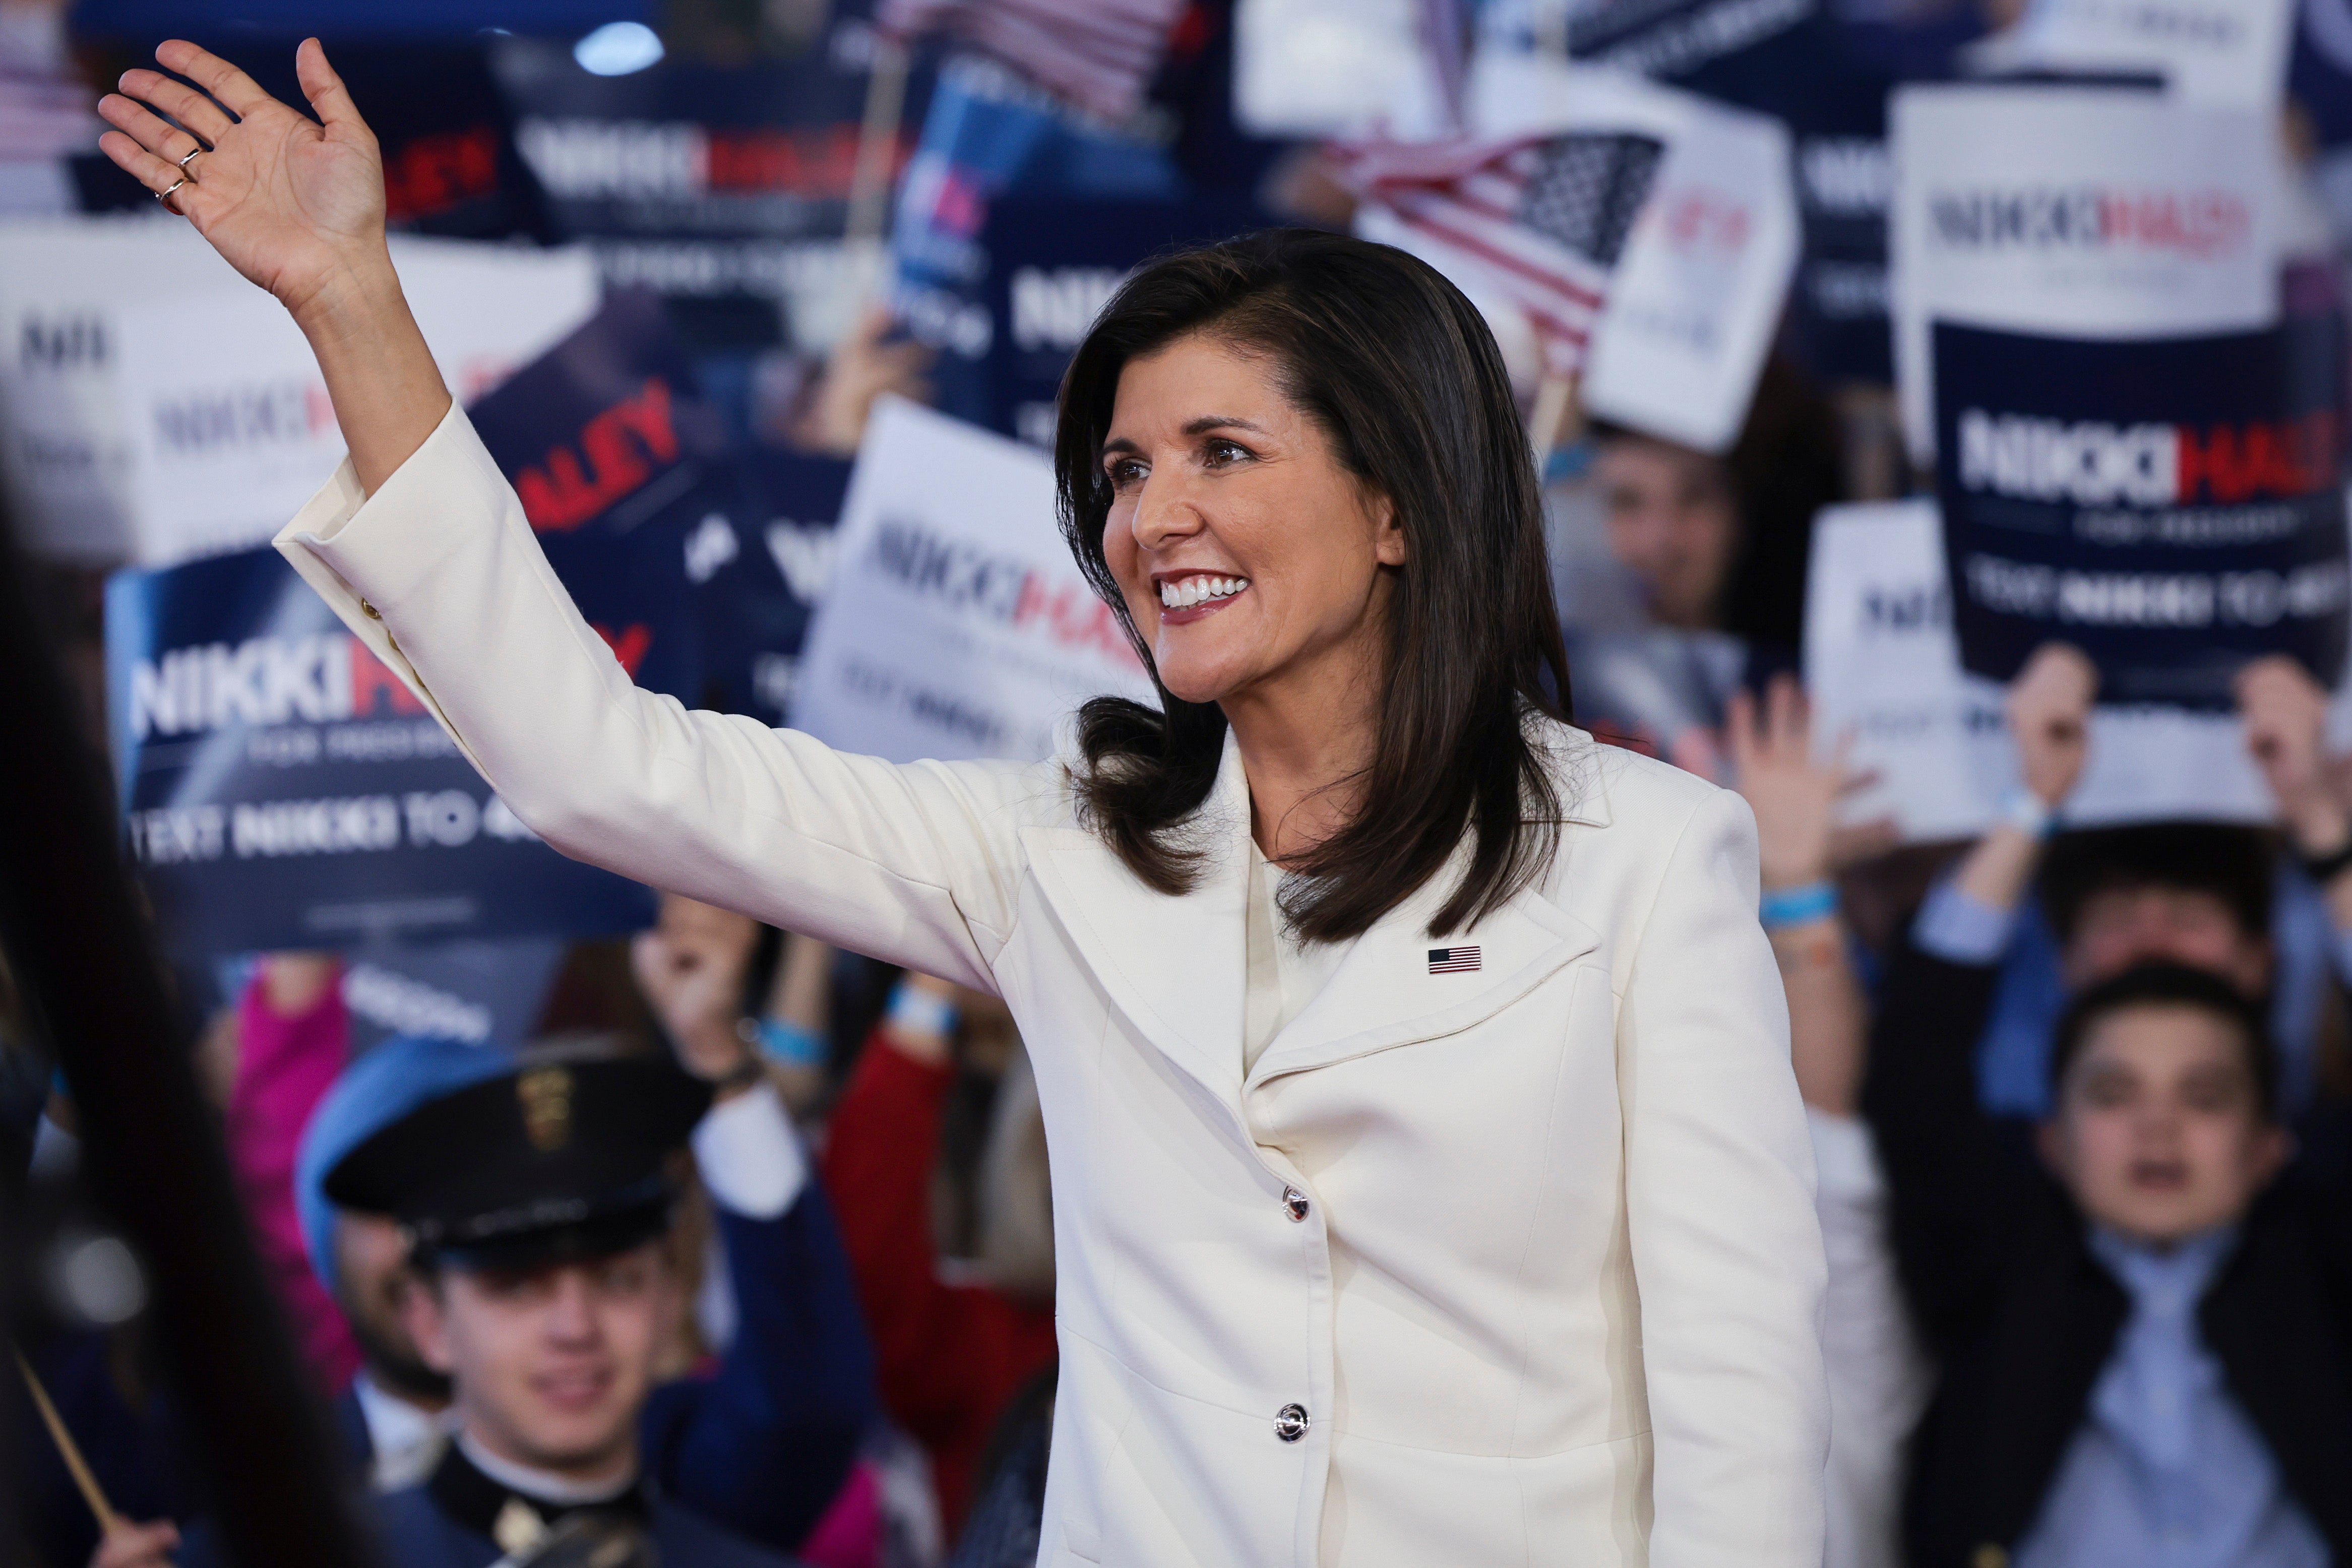 Republican candidate Nikki Haley delivers speech on China in bid to win support